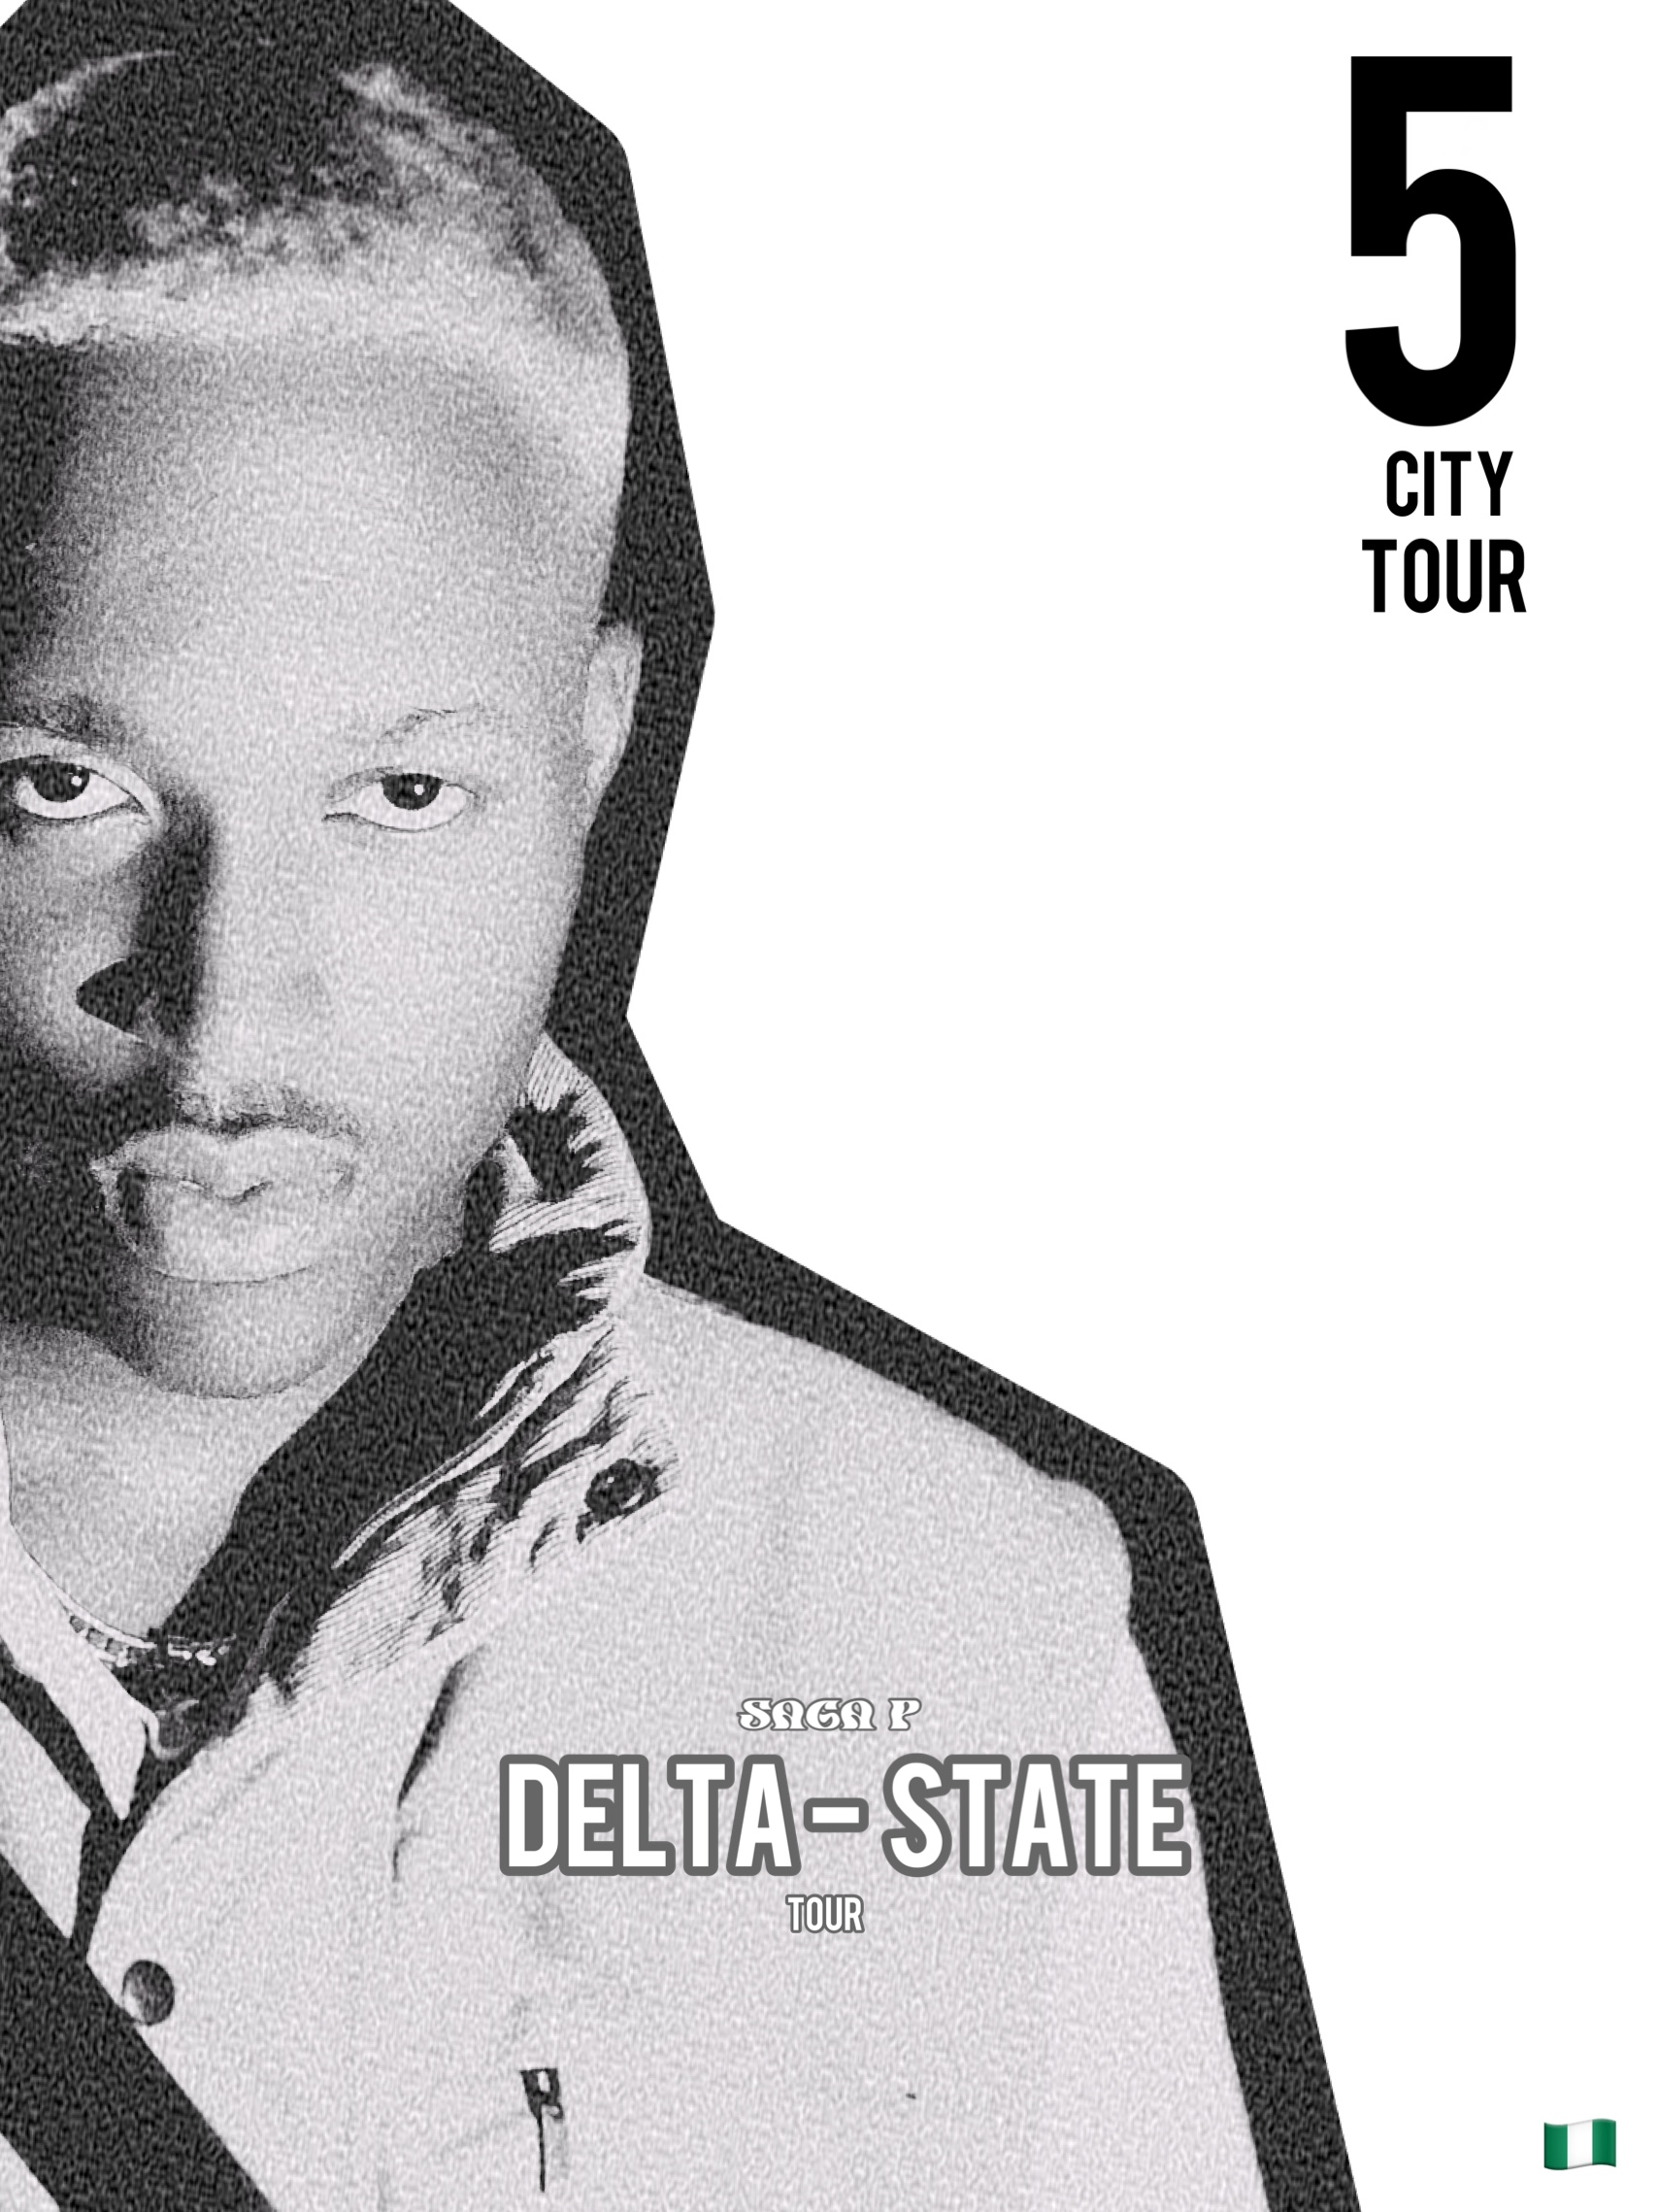 DELTA STATE 5 CITY TOUR Post free event in Nigeria using tickethub.ng, buy and sell tickets to event